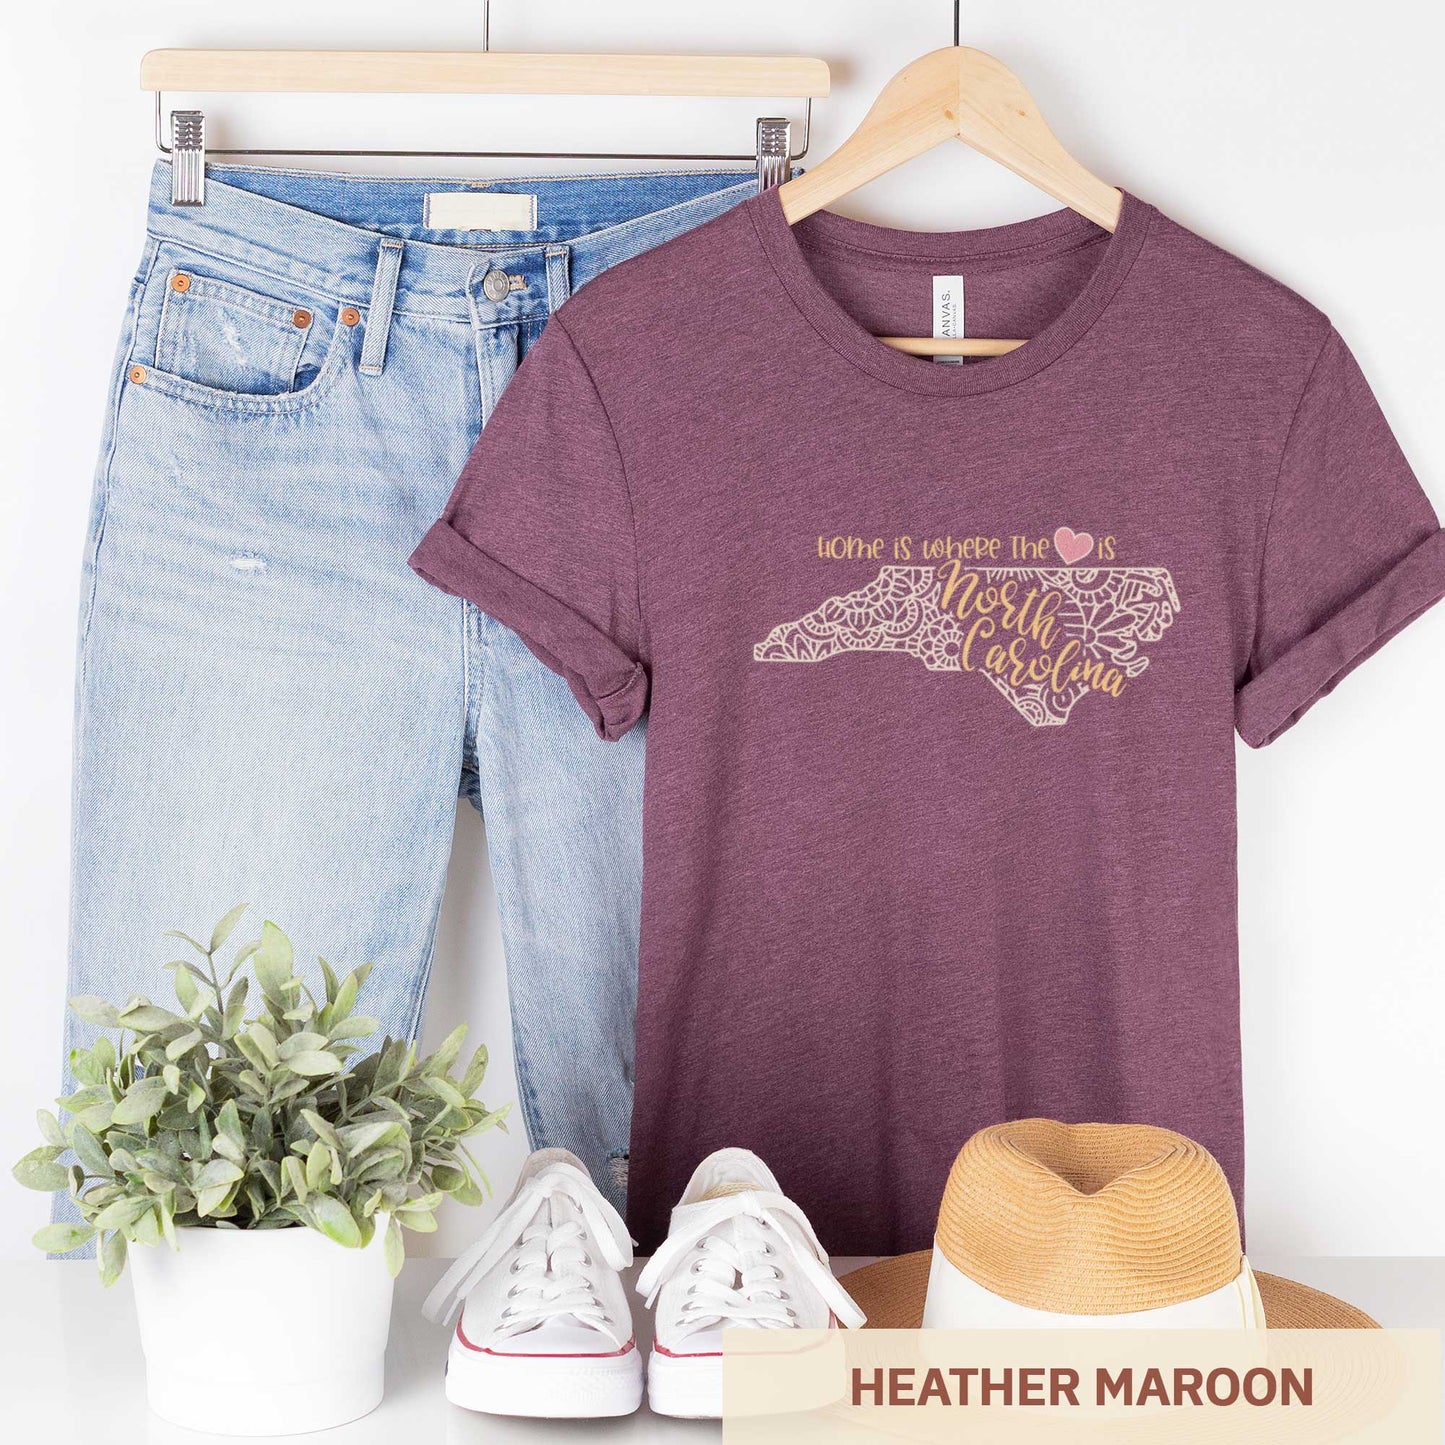 A hanging heather maroon Bella Canvas t-shirt featuring a mandala in the shape of North Carolina with the words home is where the heart is.